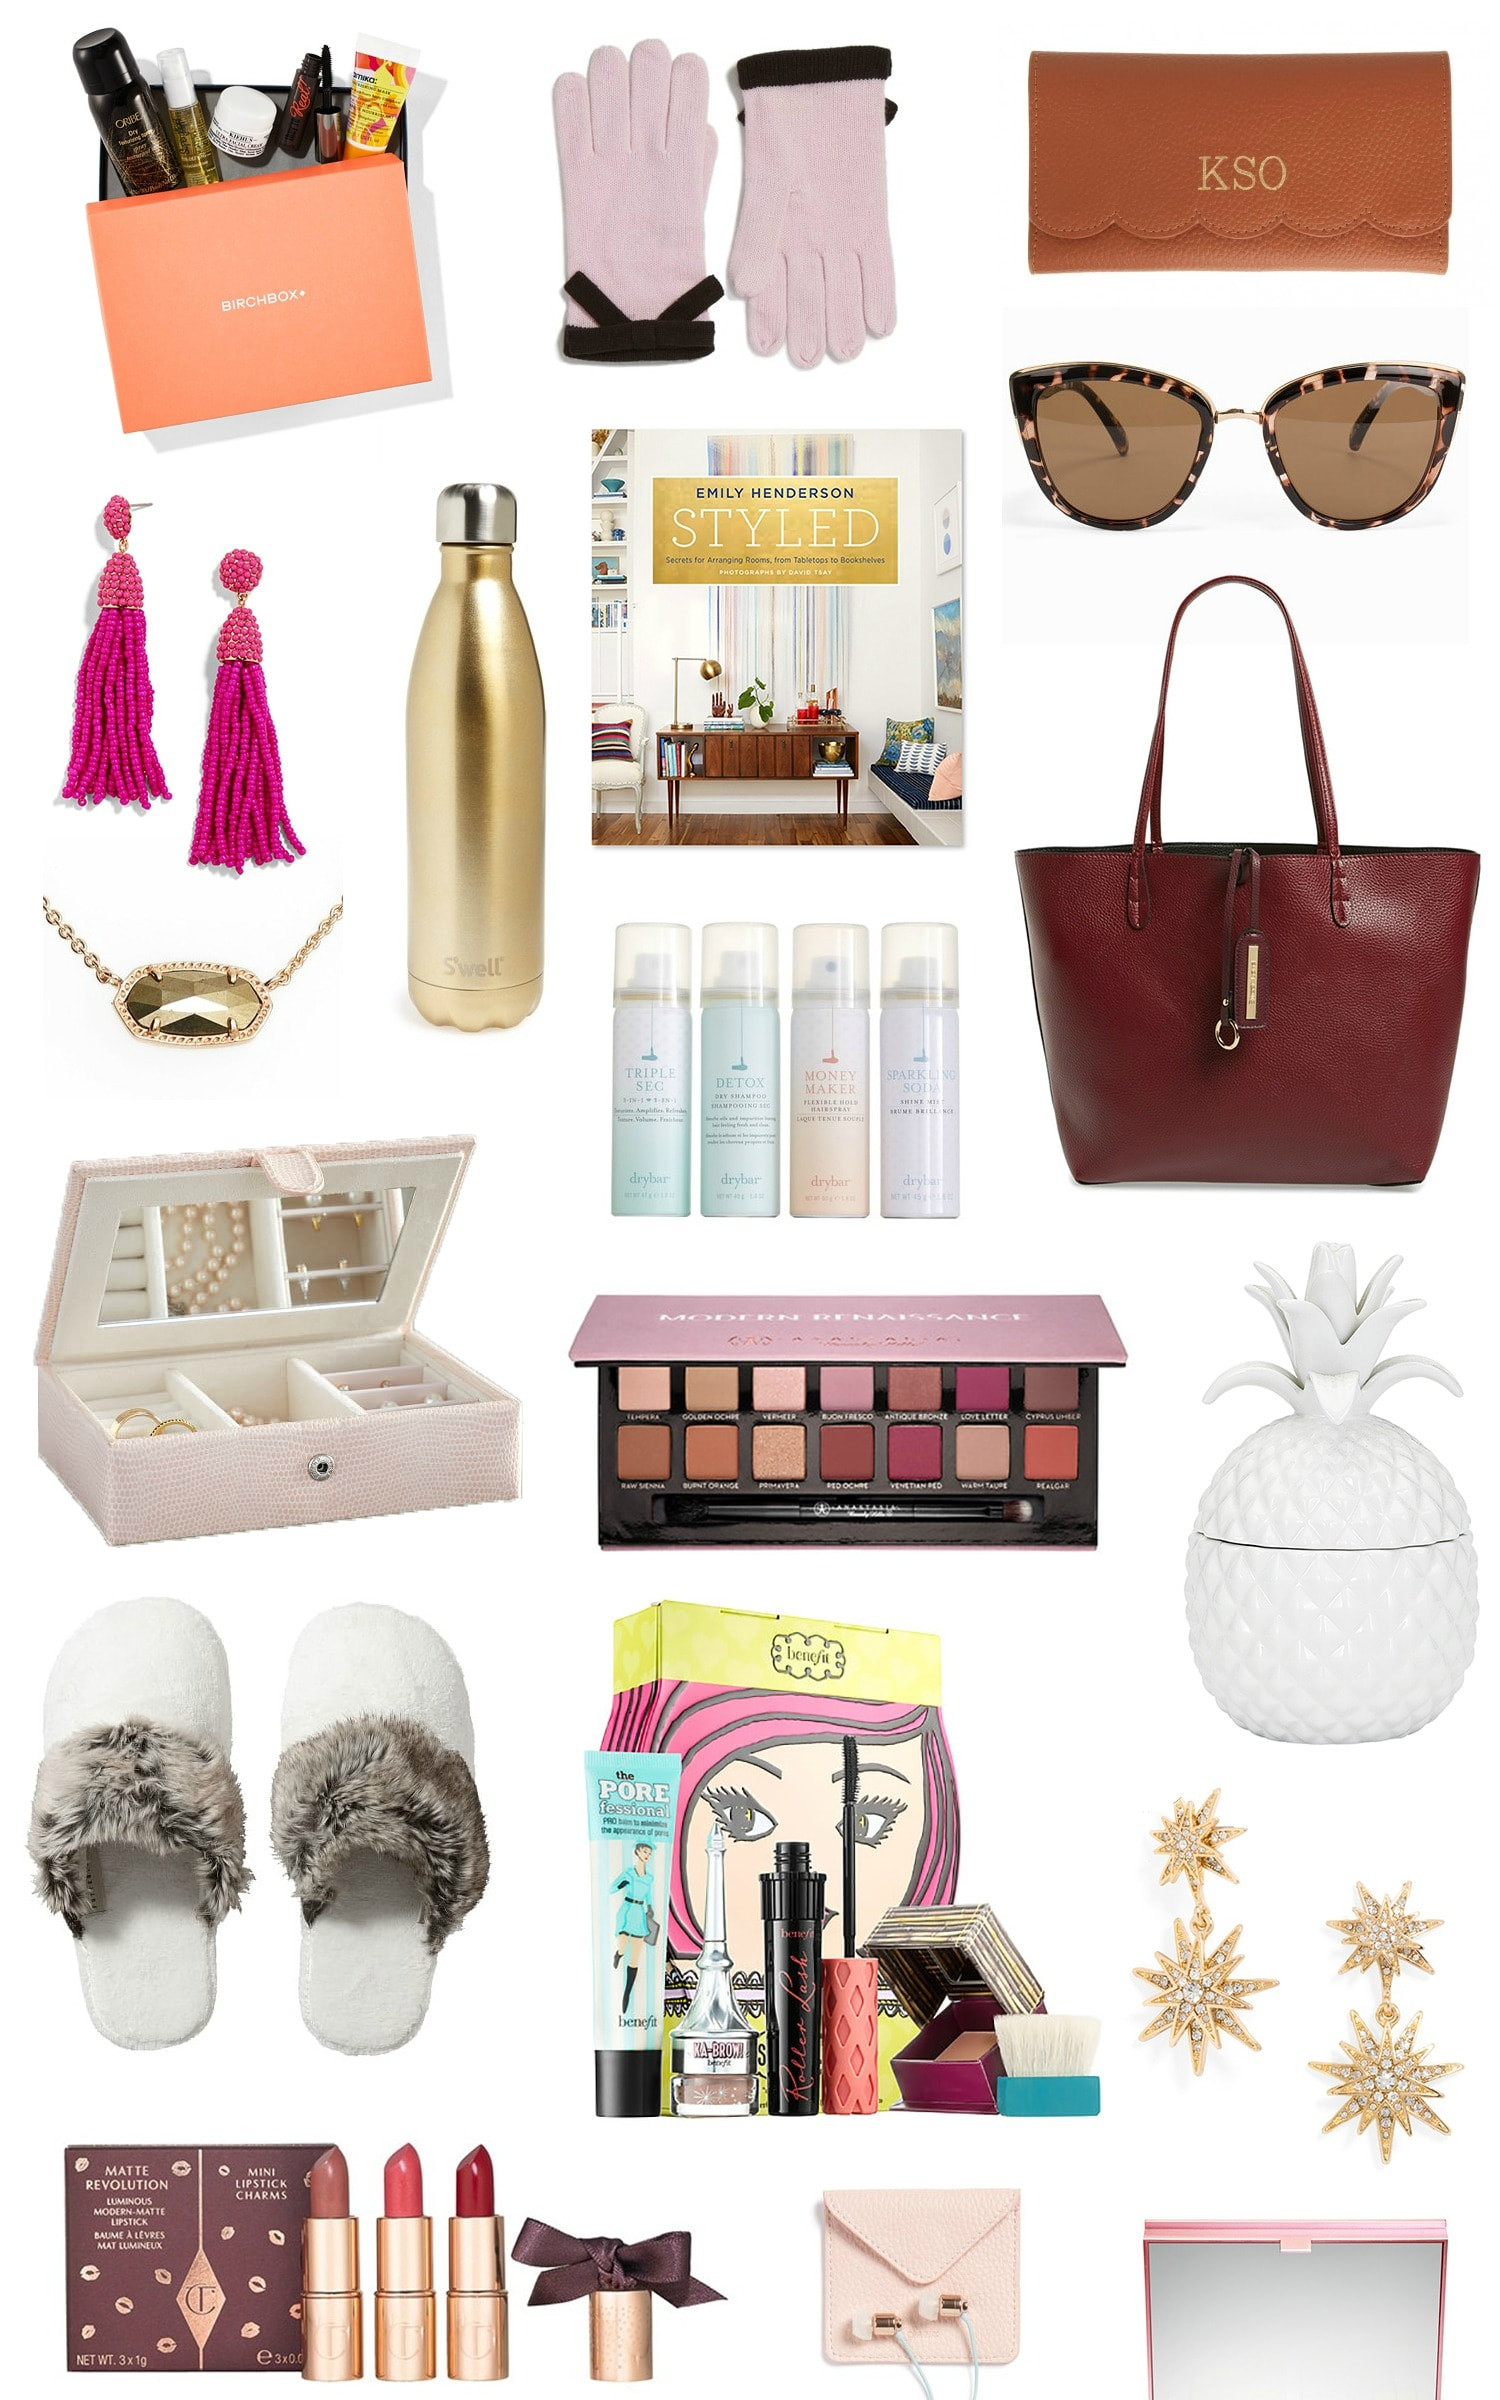 Great Holiday Gift Ideas
 The Best Christmas Gift Ideas for Women under $50